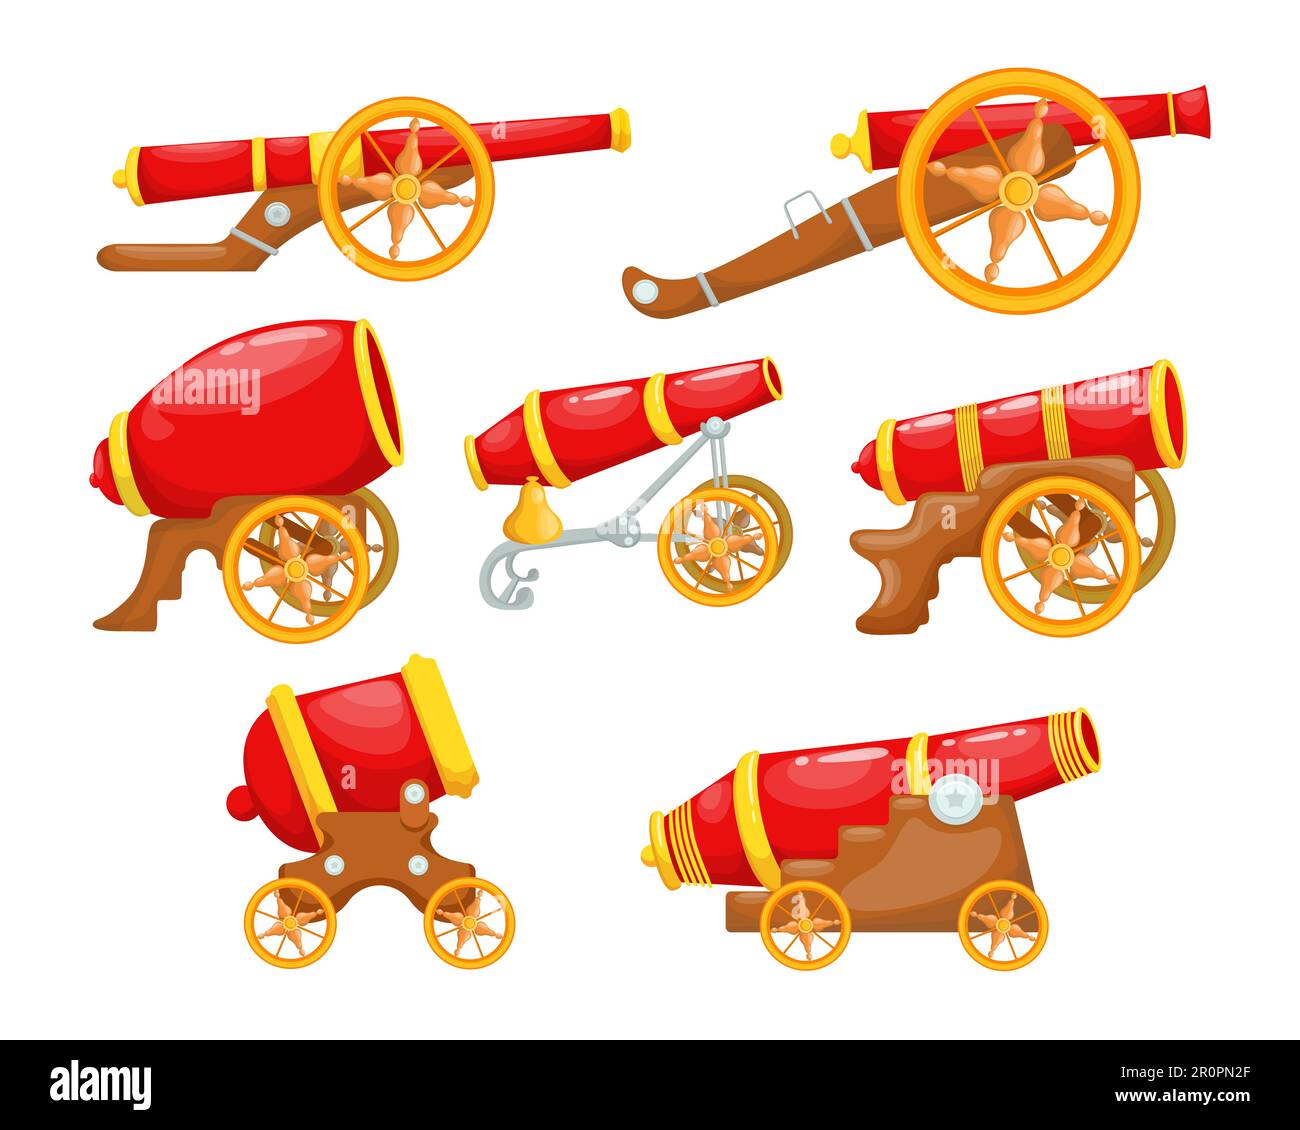 Cartoon red cannons set Stock Vector